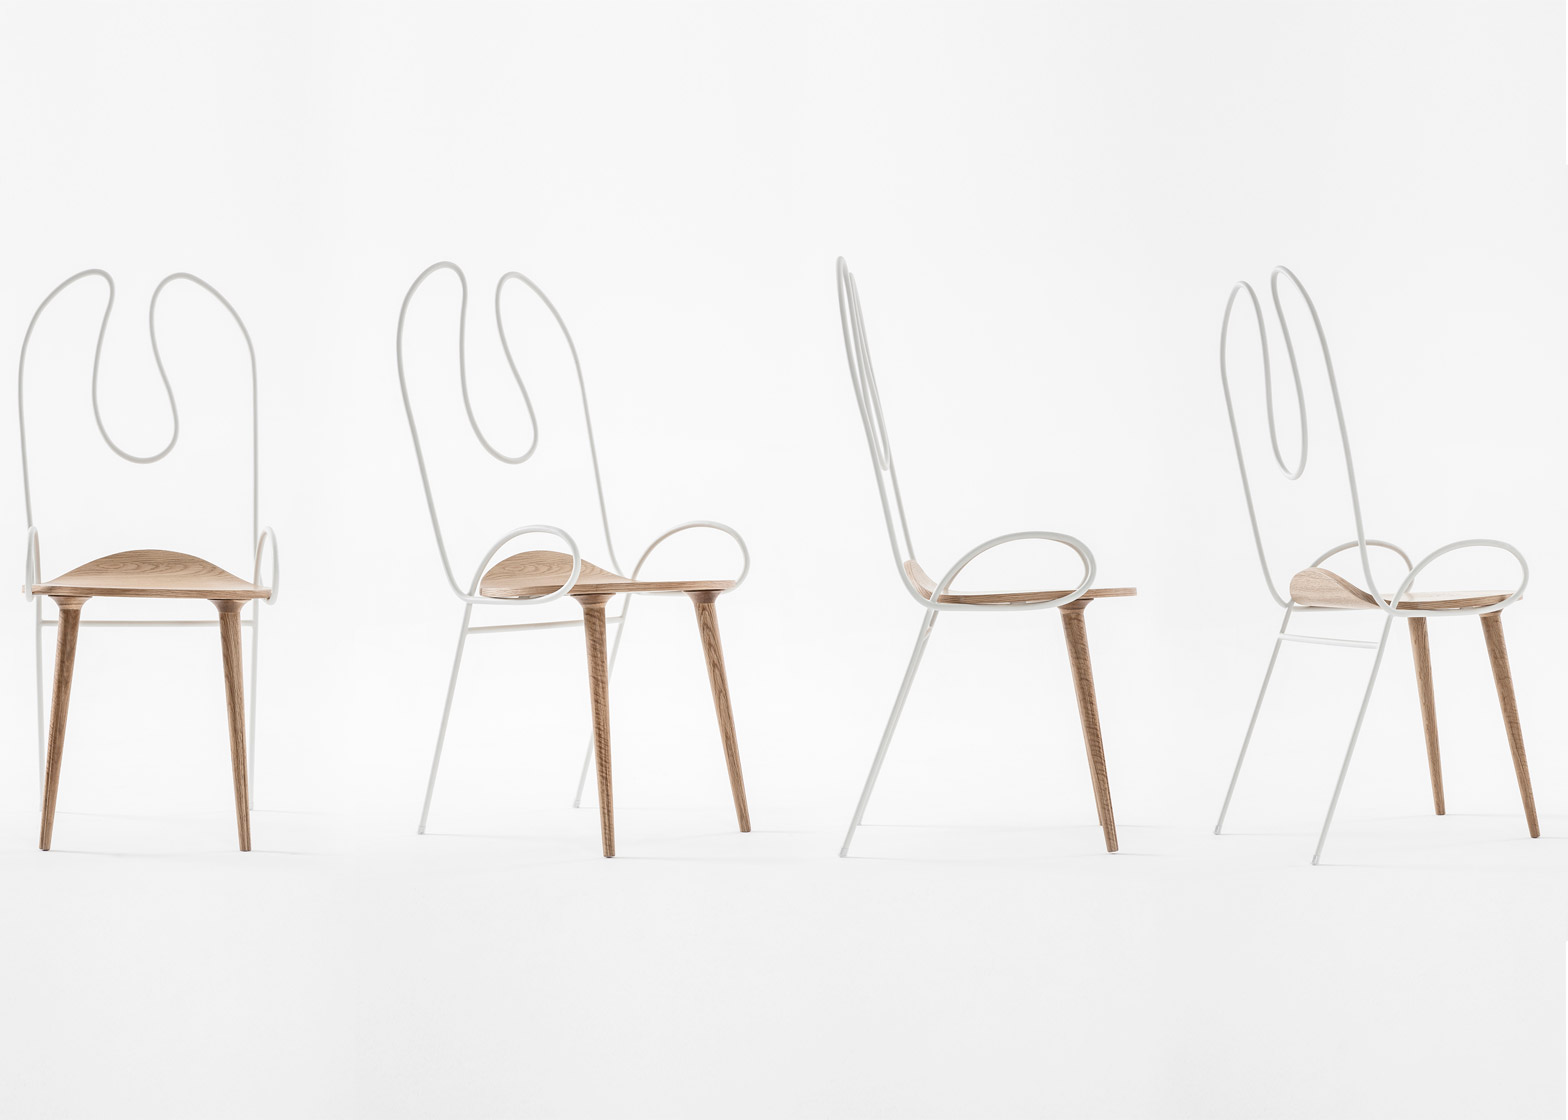 Wooden Chairs: Meet the amazing Sylph chair by Atelier Deshaus